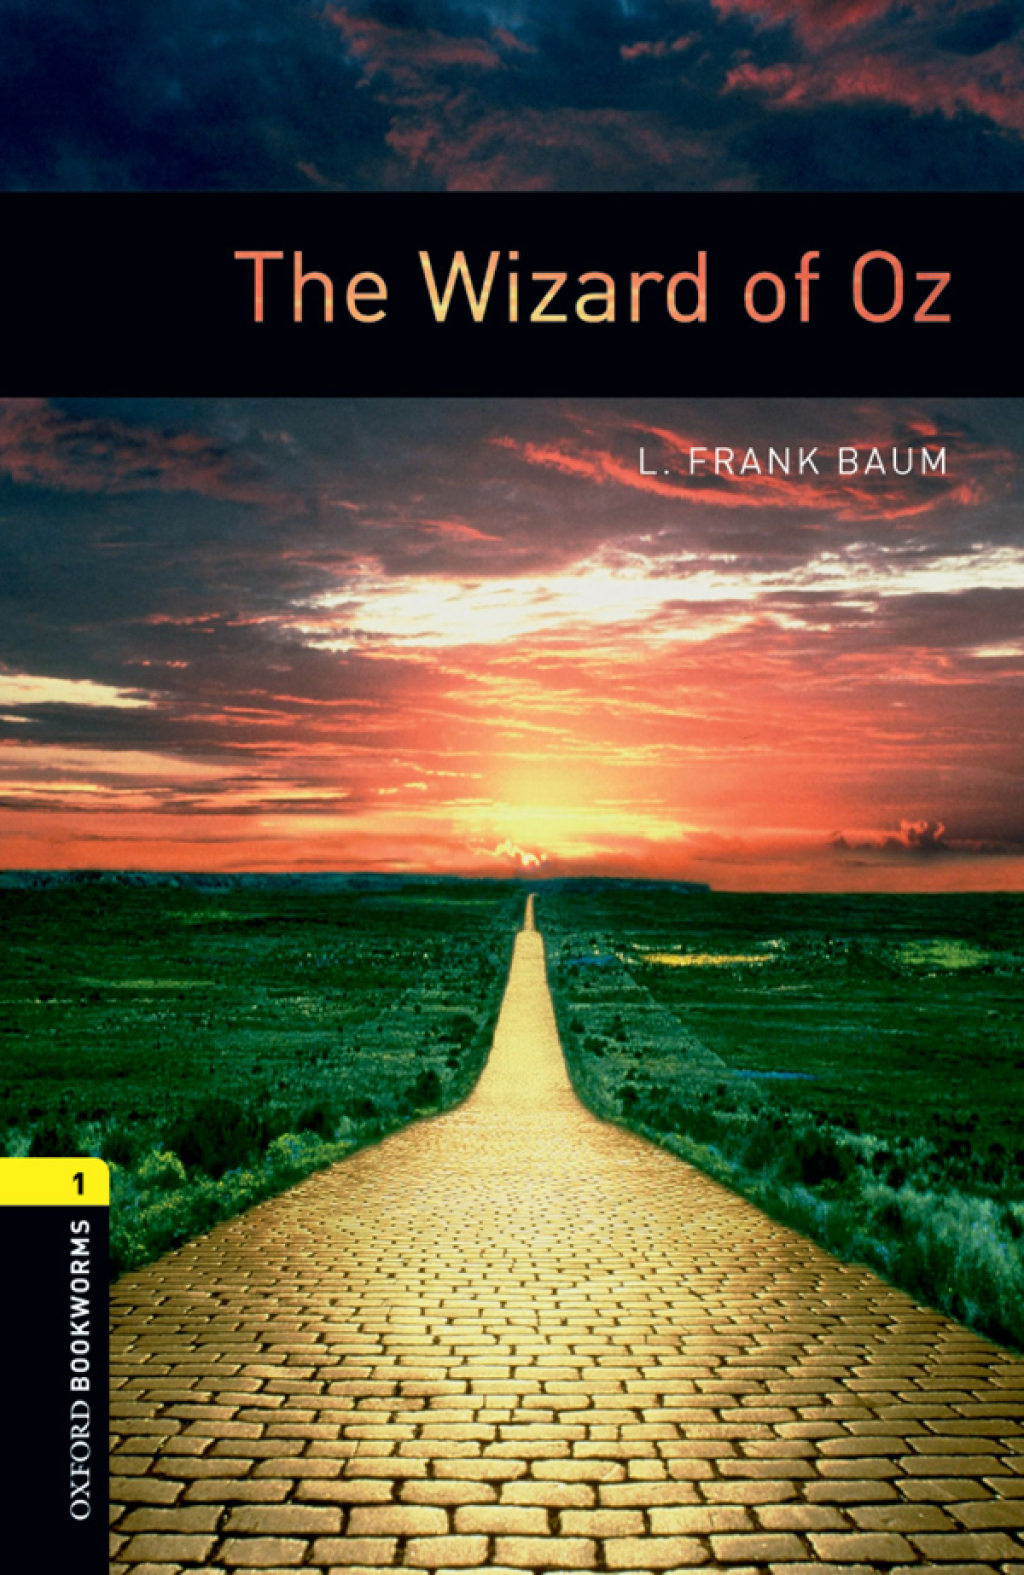 The Wizard of Oz Level 1 Oxford Bookworms Library - 3rd Edition (eBook Rental)